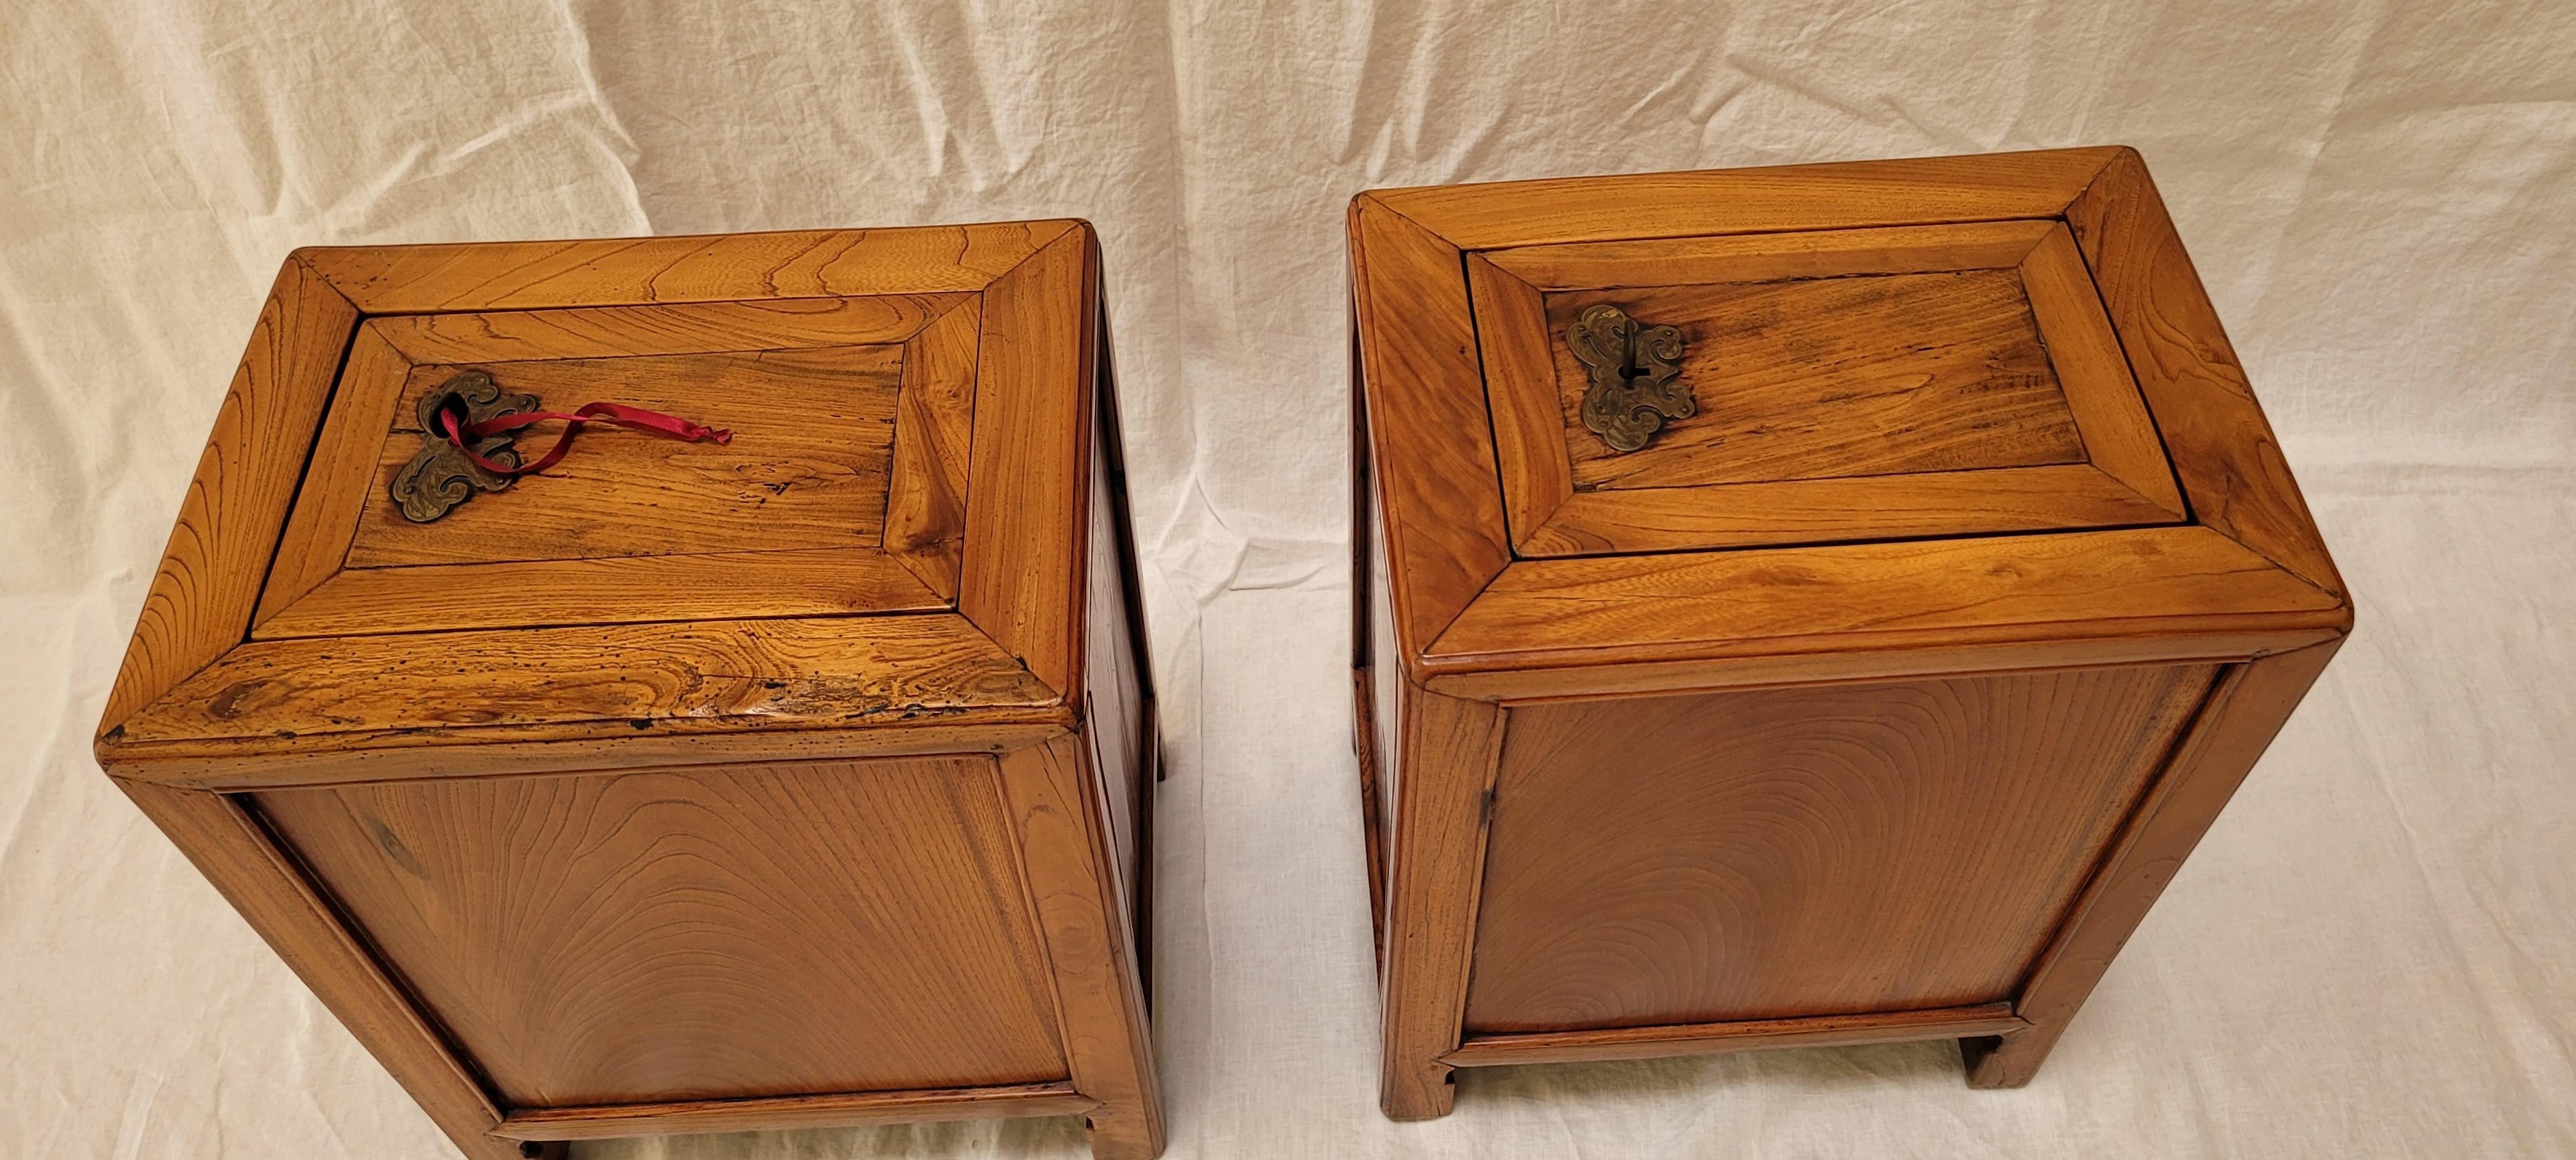 19th Century Pair of Money Chests In Good Condition For Sale In Santa Monica, CA